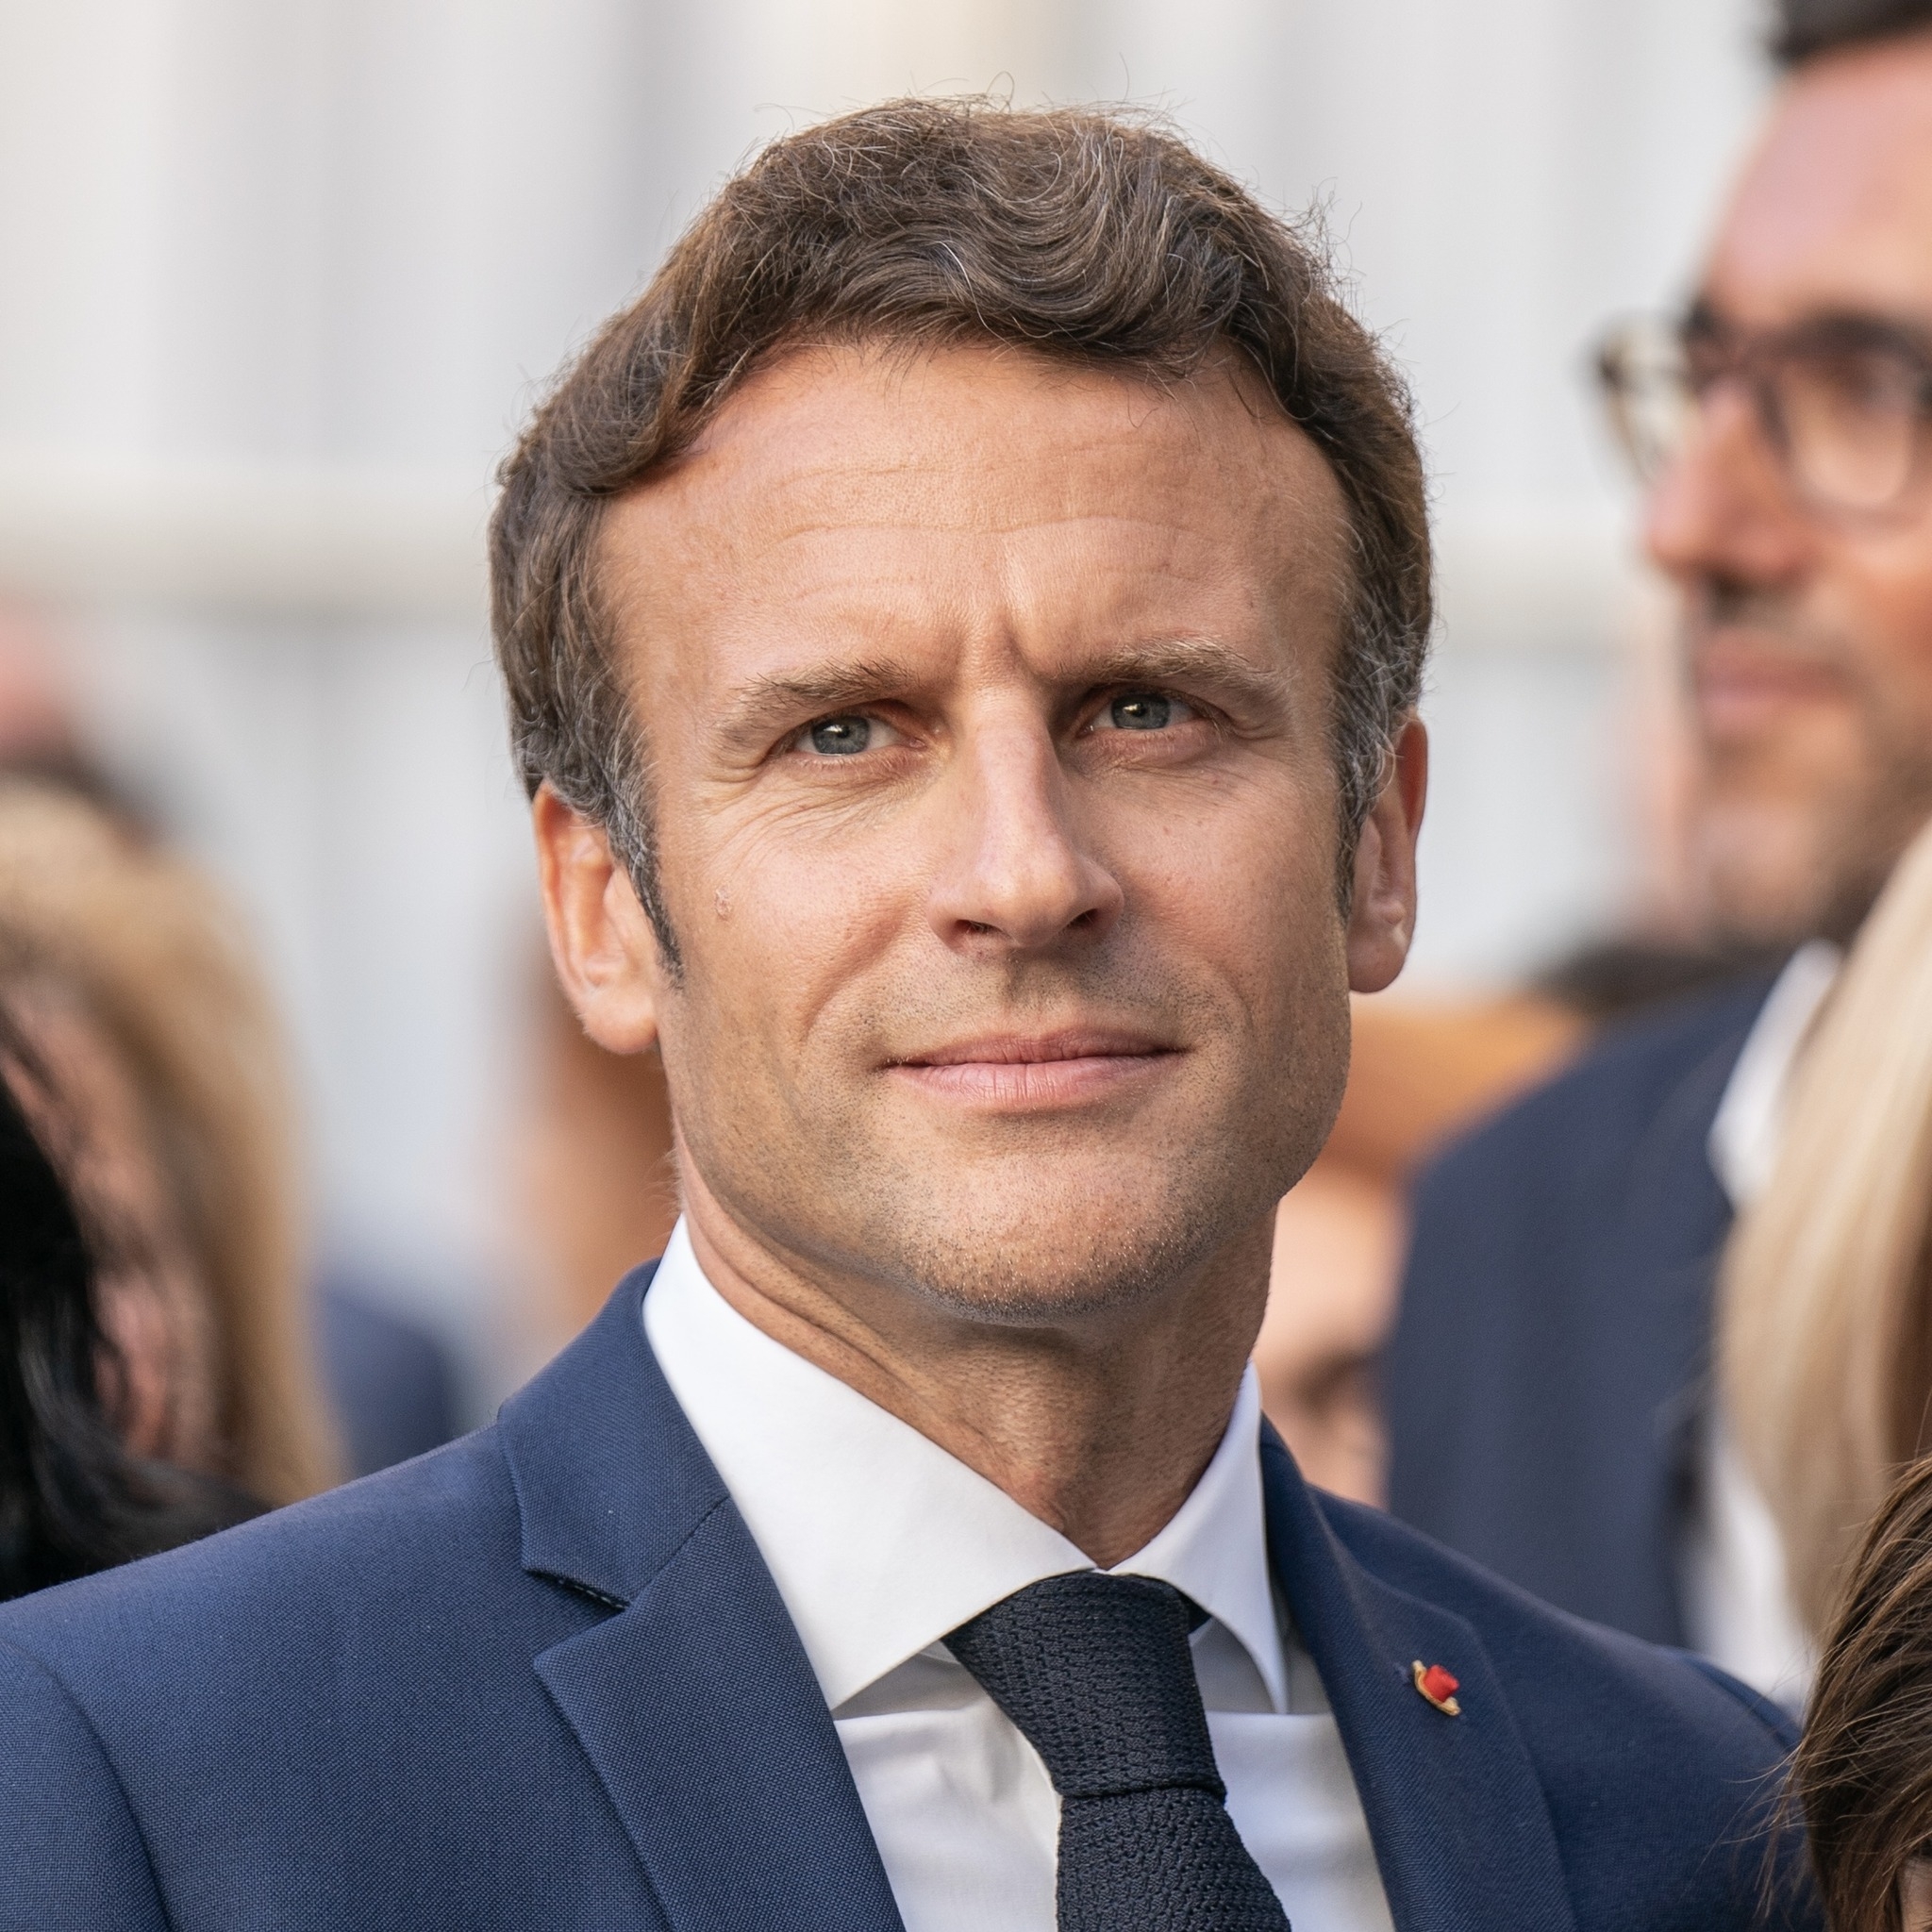 Watch: French President Emmanuel Macron Says 2023 Will Be the Year of Pension Reform